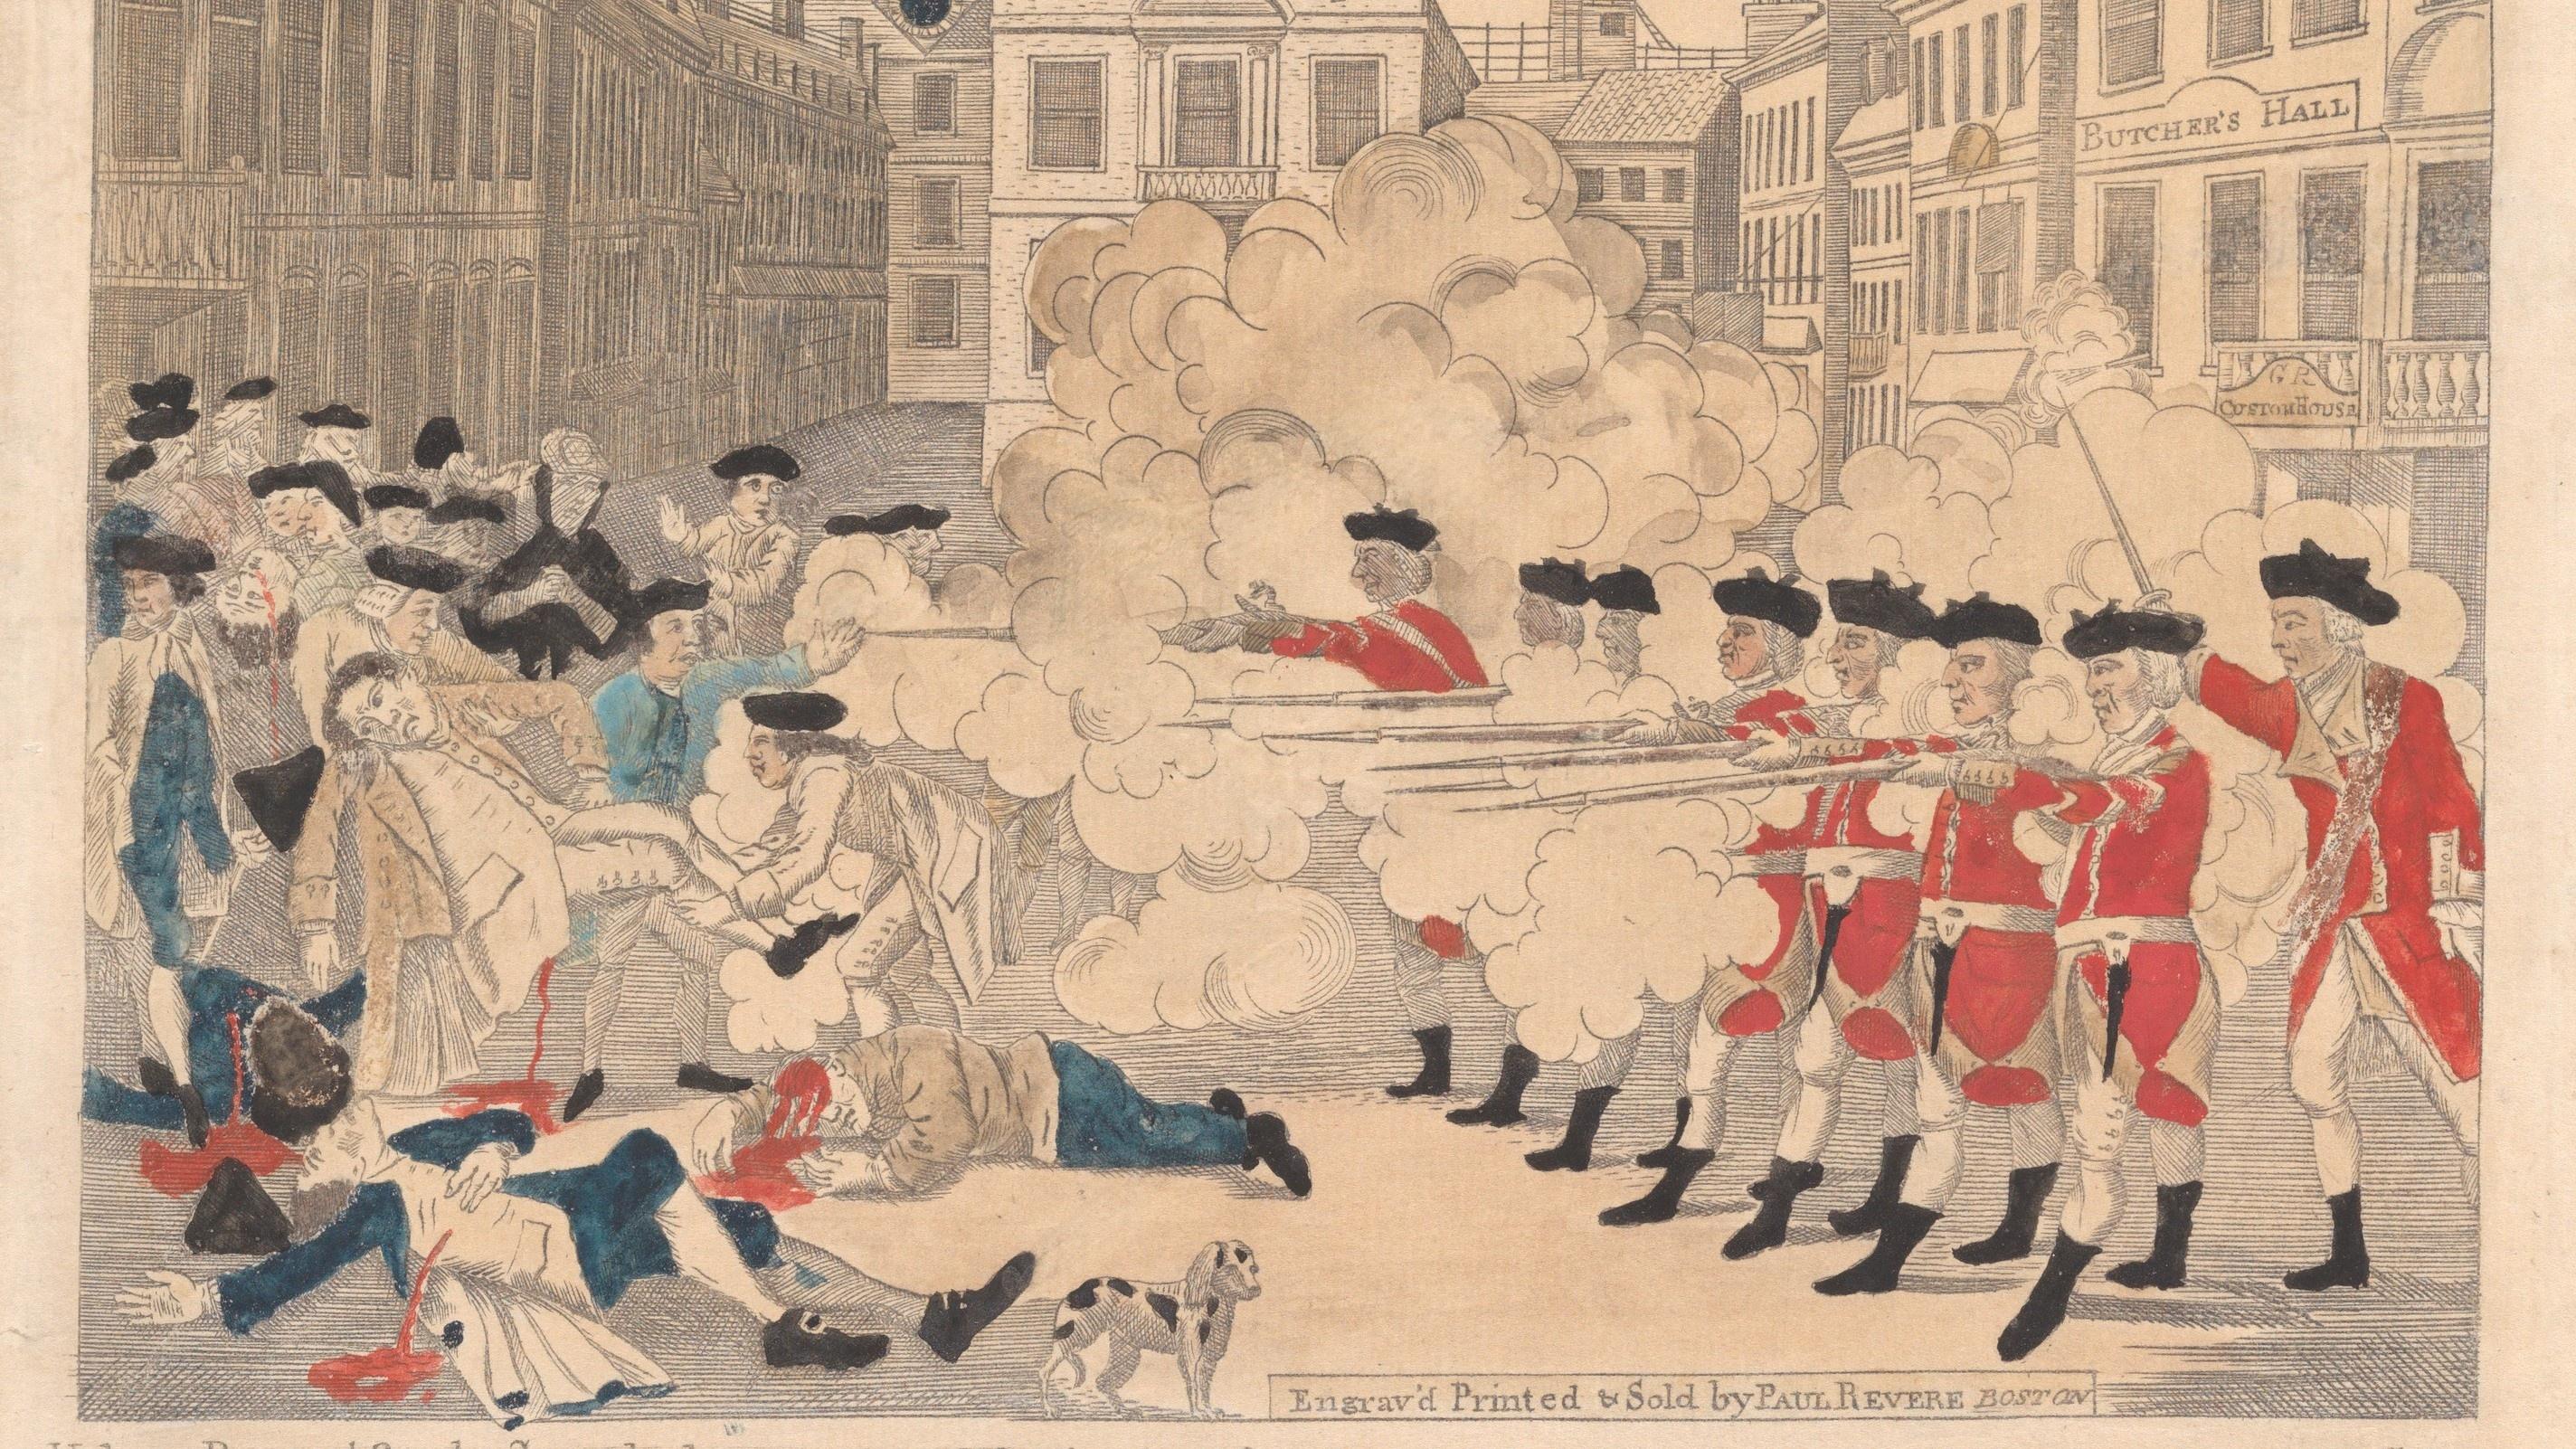 Why Was the Boston Massacre Important? - Lesson for Kids - Video